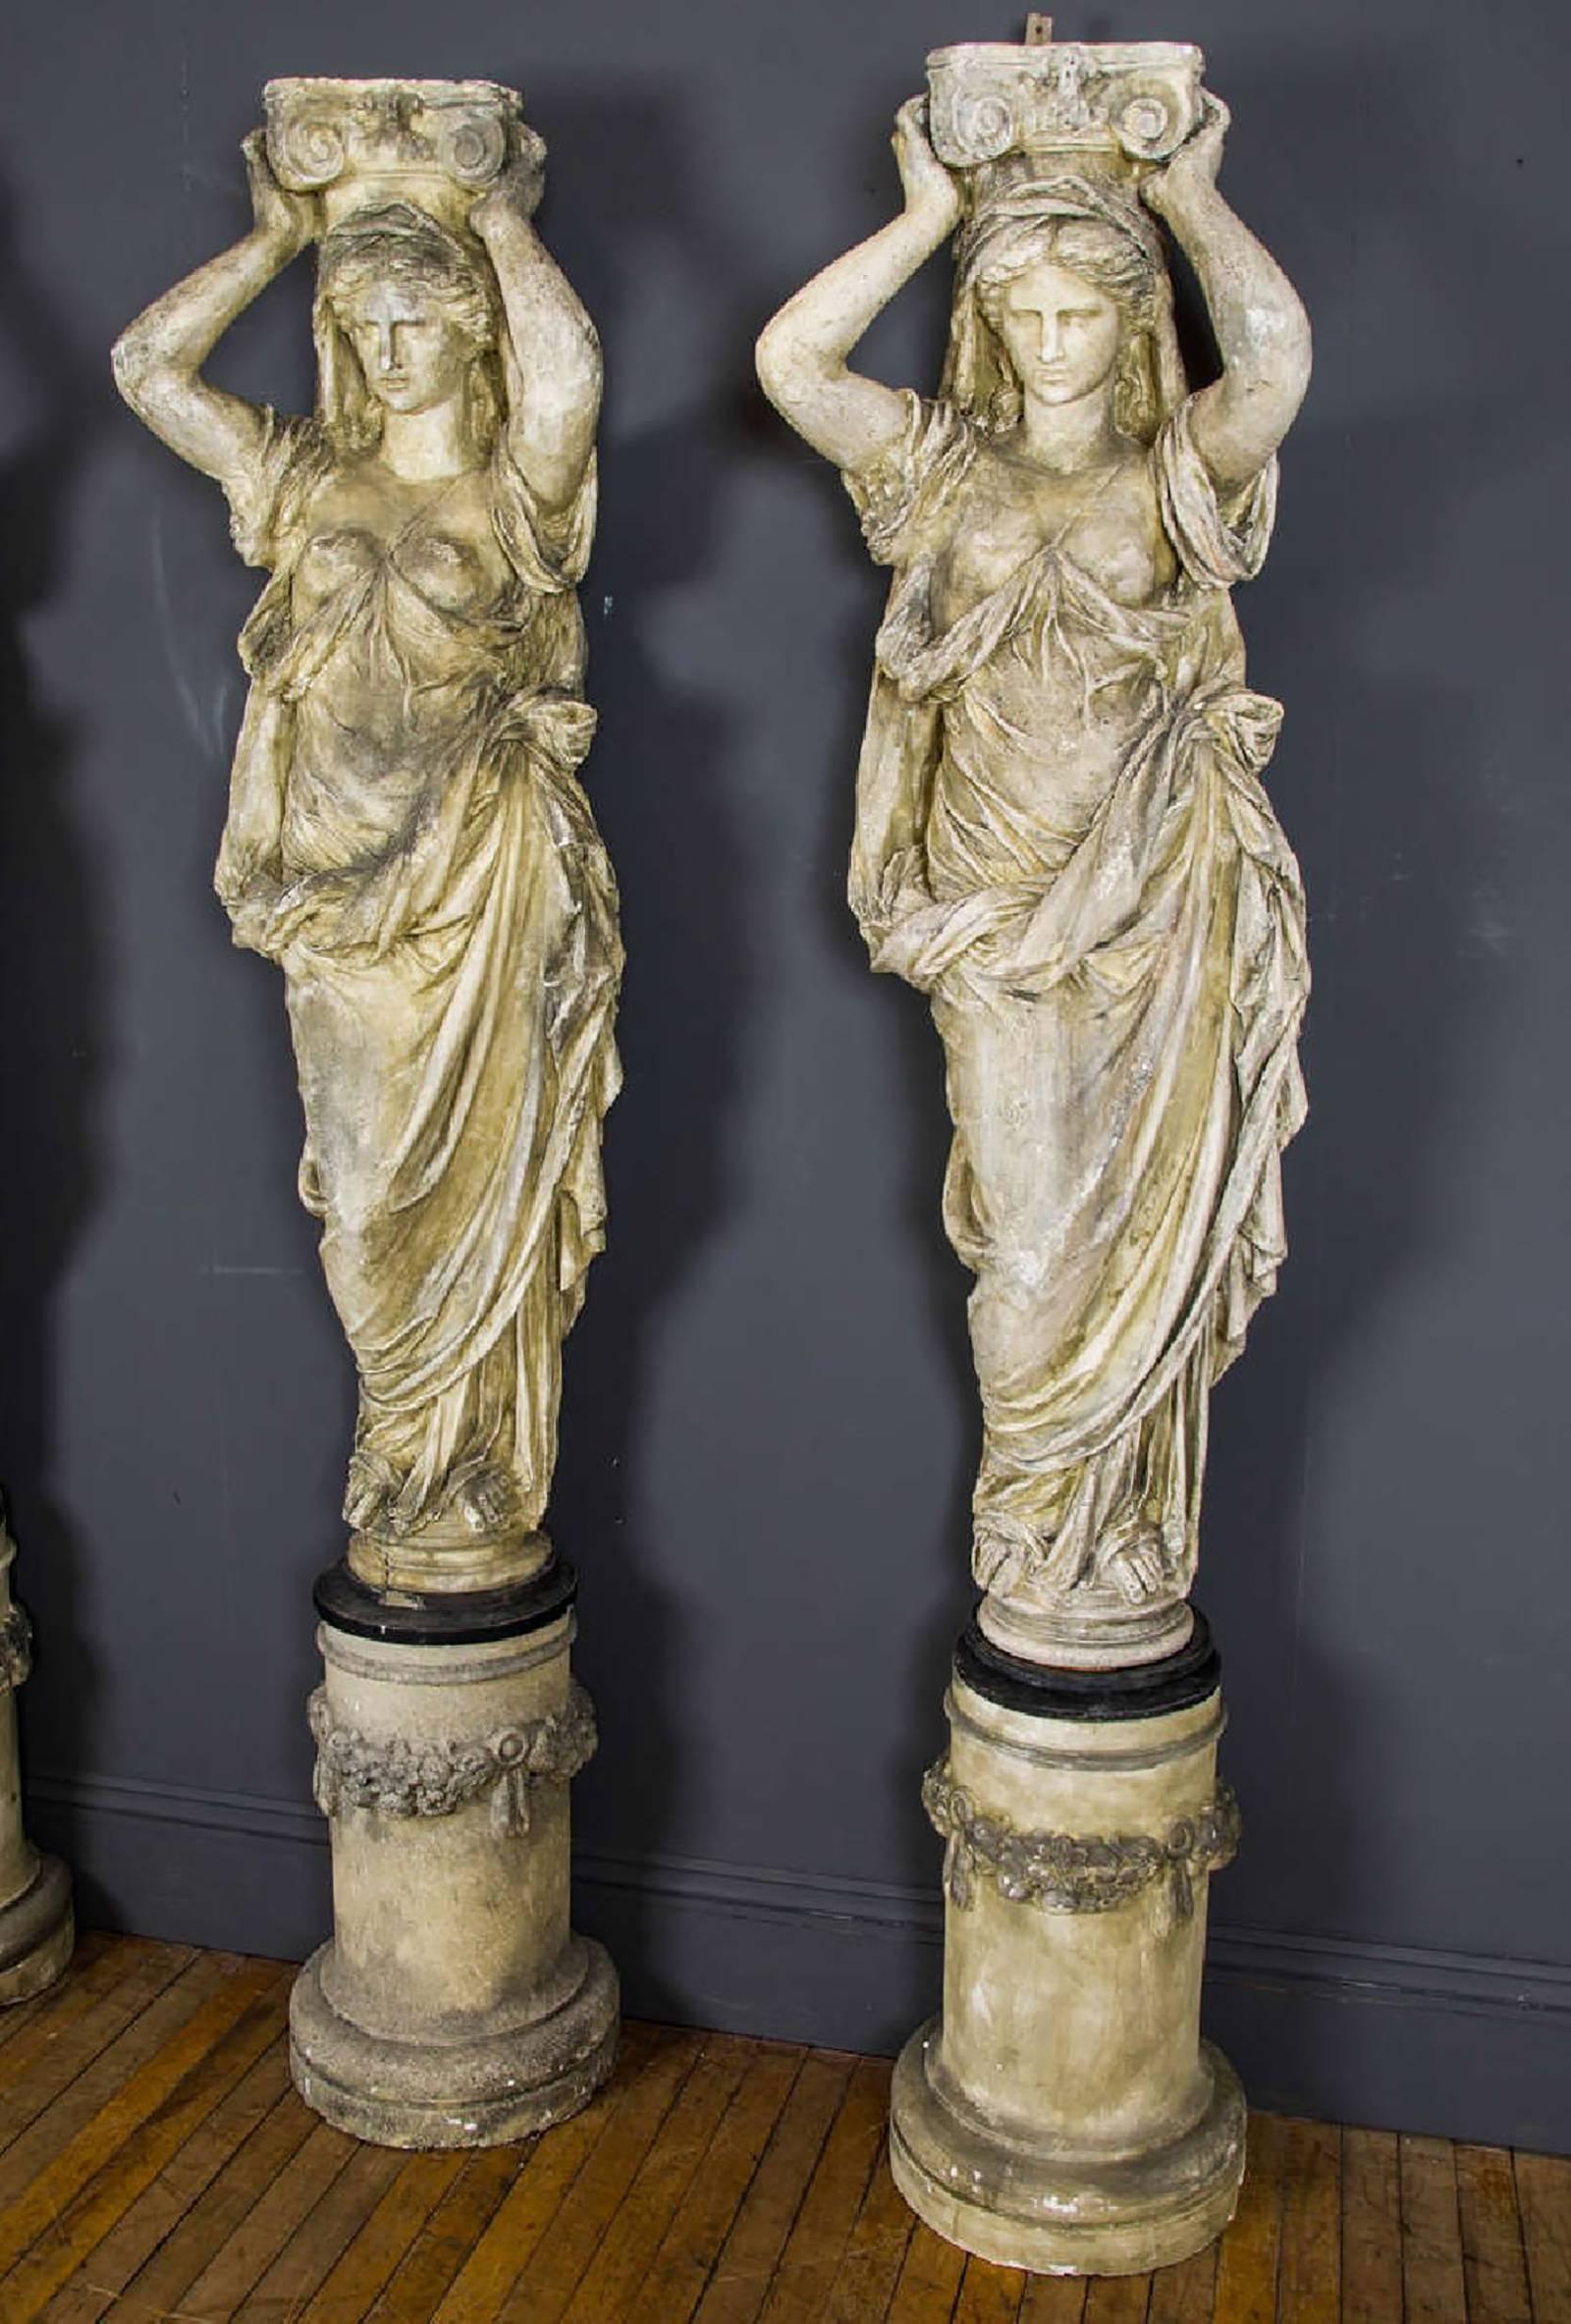 A beautiful and elaborate pair of French caryatids, of plaster construction, depicting ancient classical Greek female figures supporting Corinthian capitals standing on decorated bases. Each figure measures 80 in – 203.2 cm in height, 19 in – 48.2